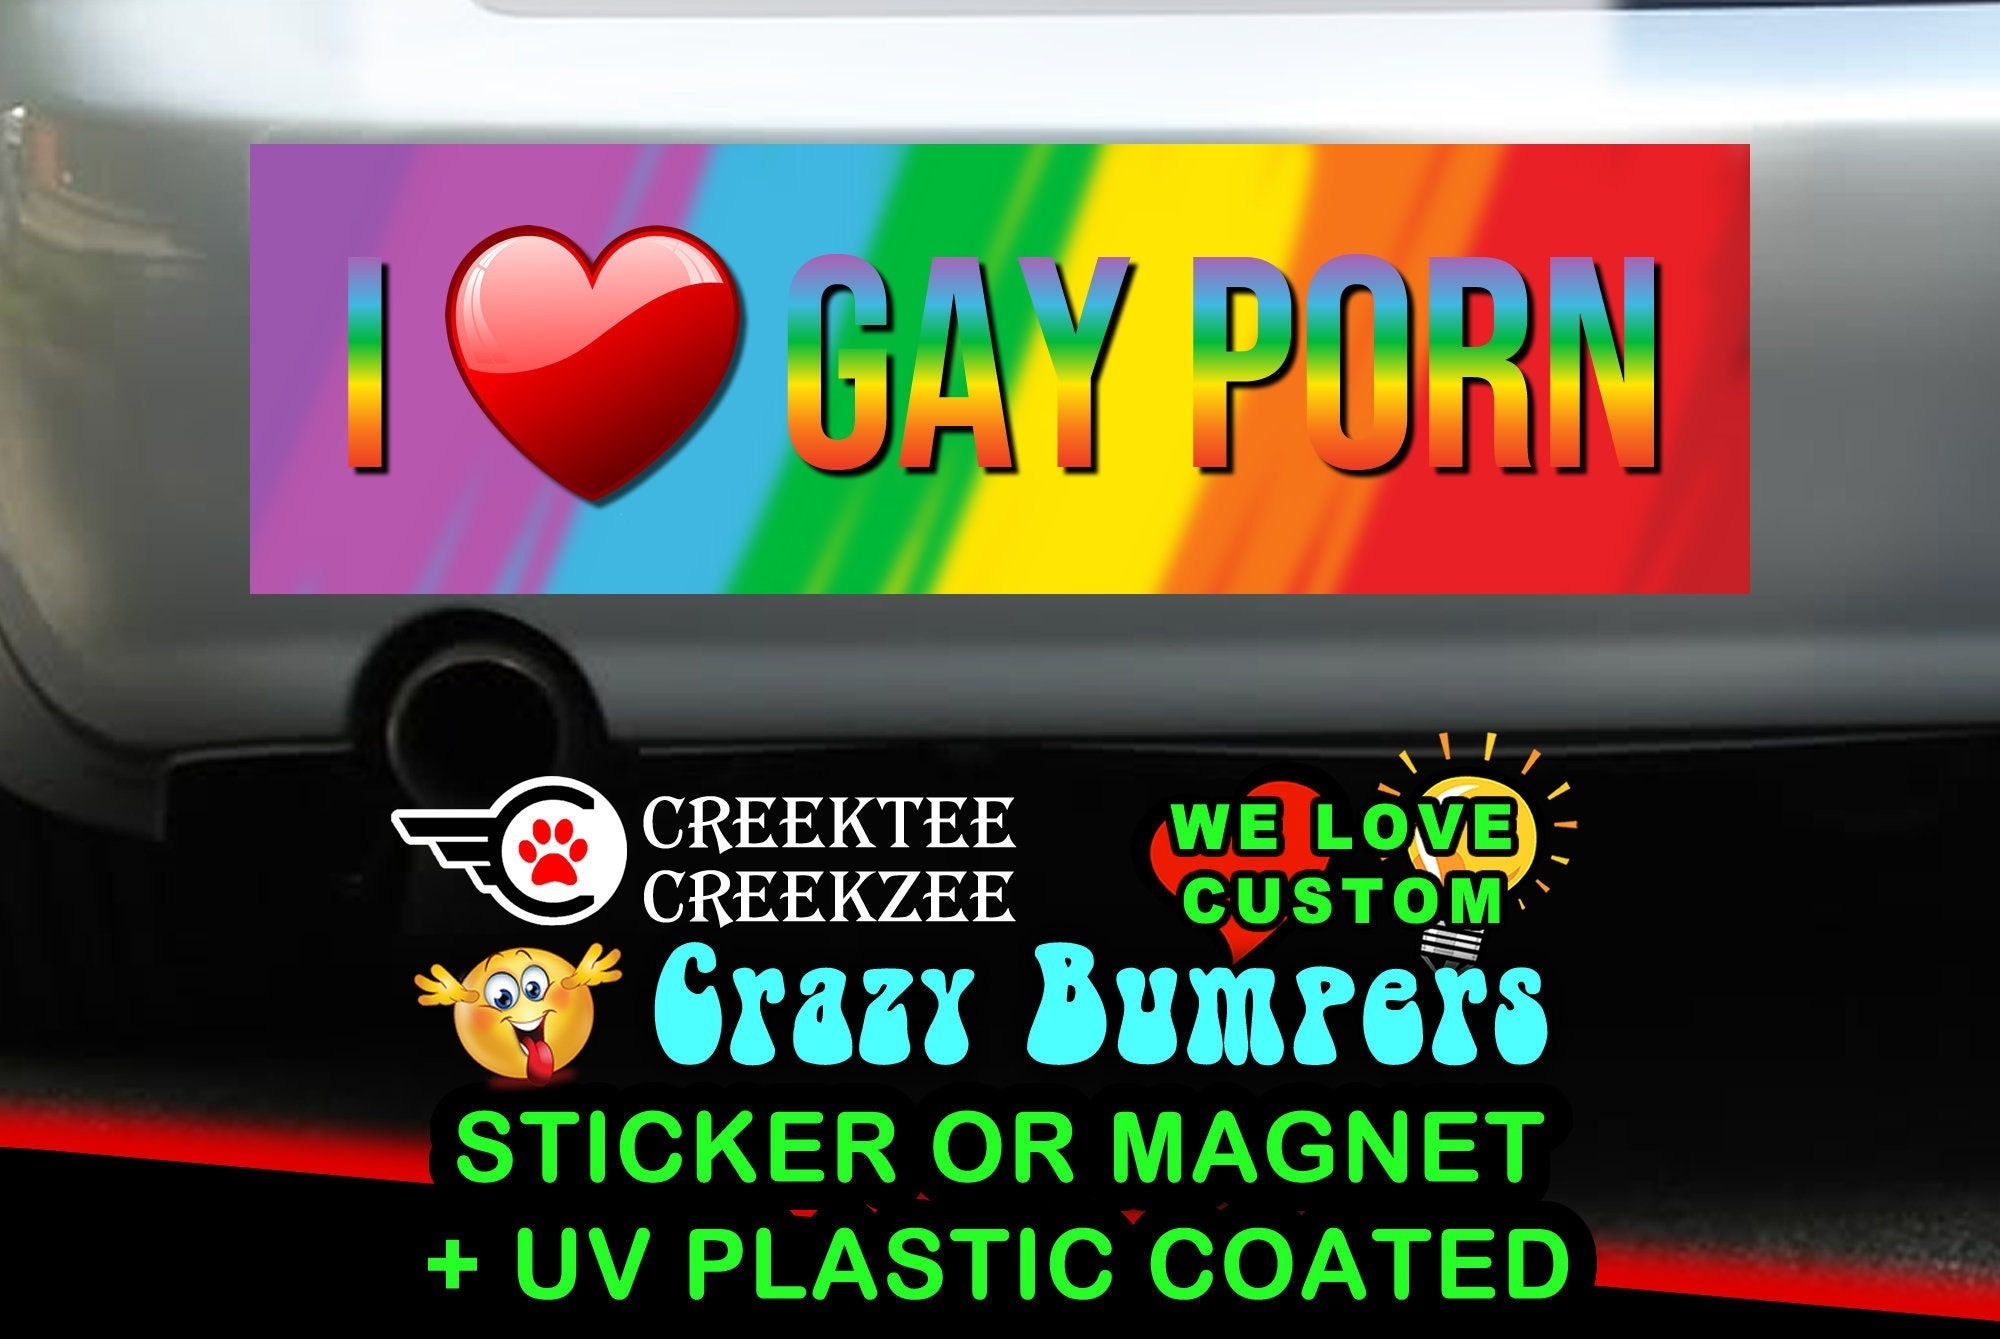 I Love Gay Porn Bumper Sticker or Magnet in new sizes, 4